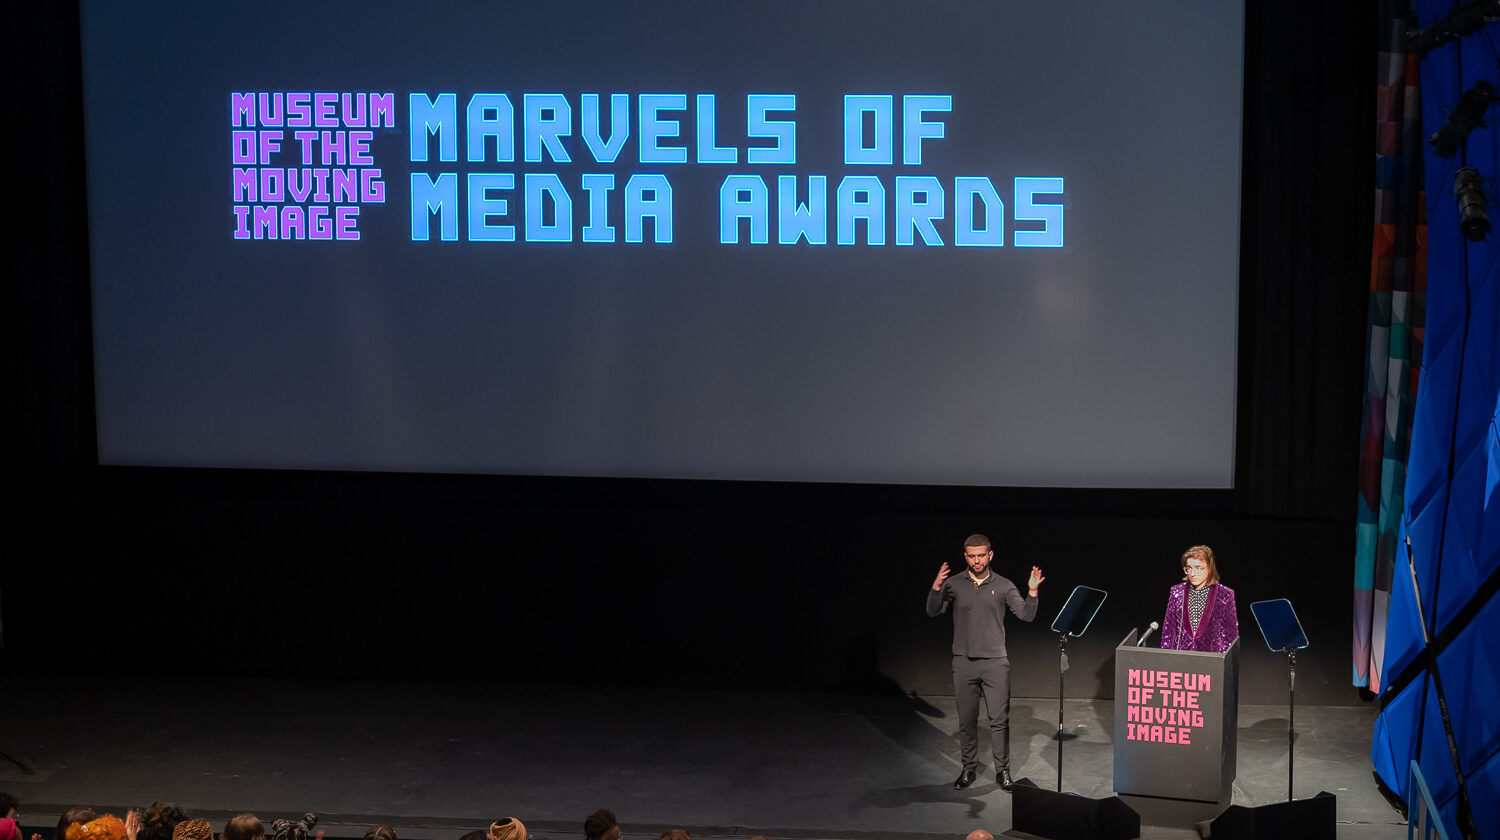 a white man in a sparkly purple suit stands at a podium on a large stage with a sign-language interpreter next to him while on the screen there are words that read Marvels of Media Awards